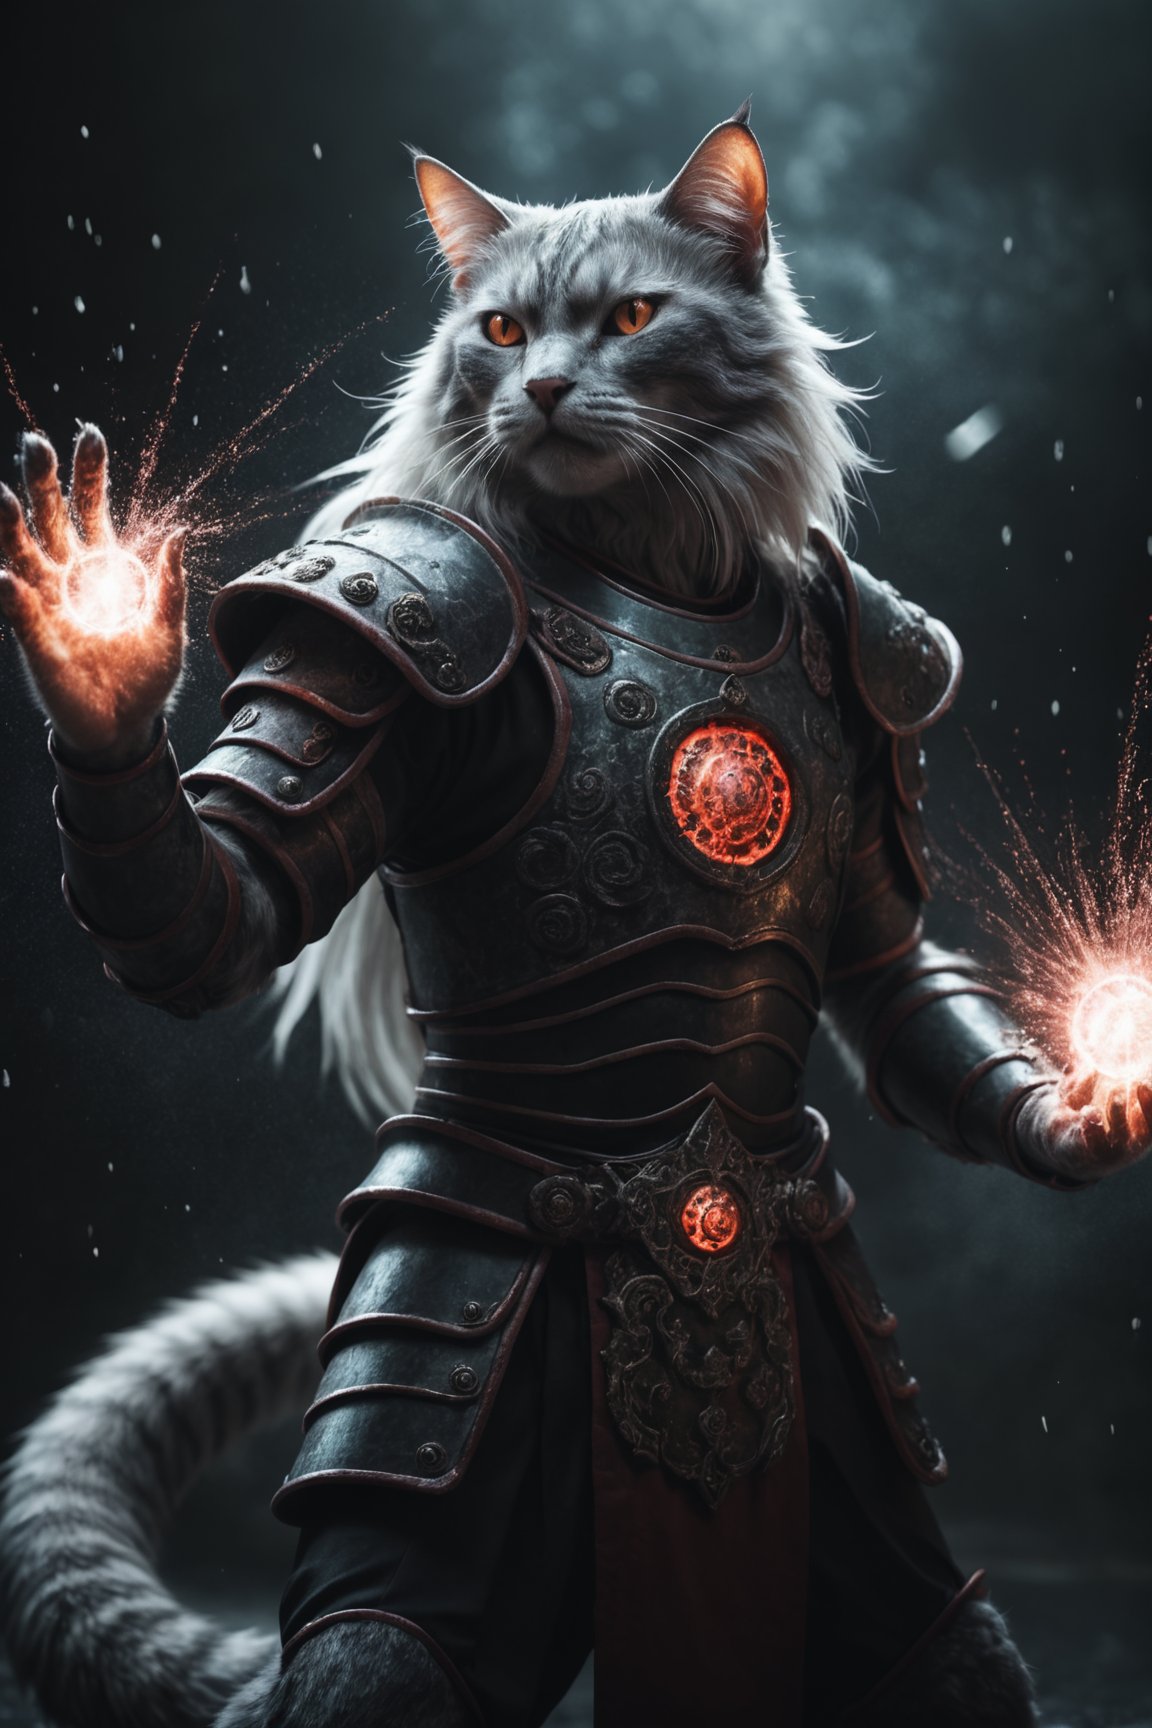 photo, a cat demon, asian_mythology, seven tailed, wearing armor, epic, dark atmosphere, magic particles 